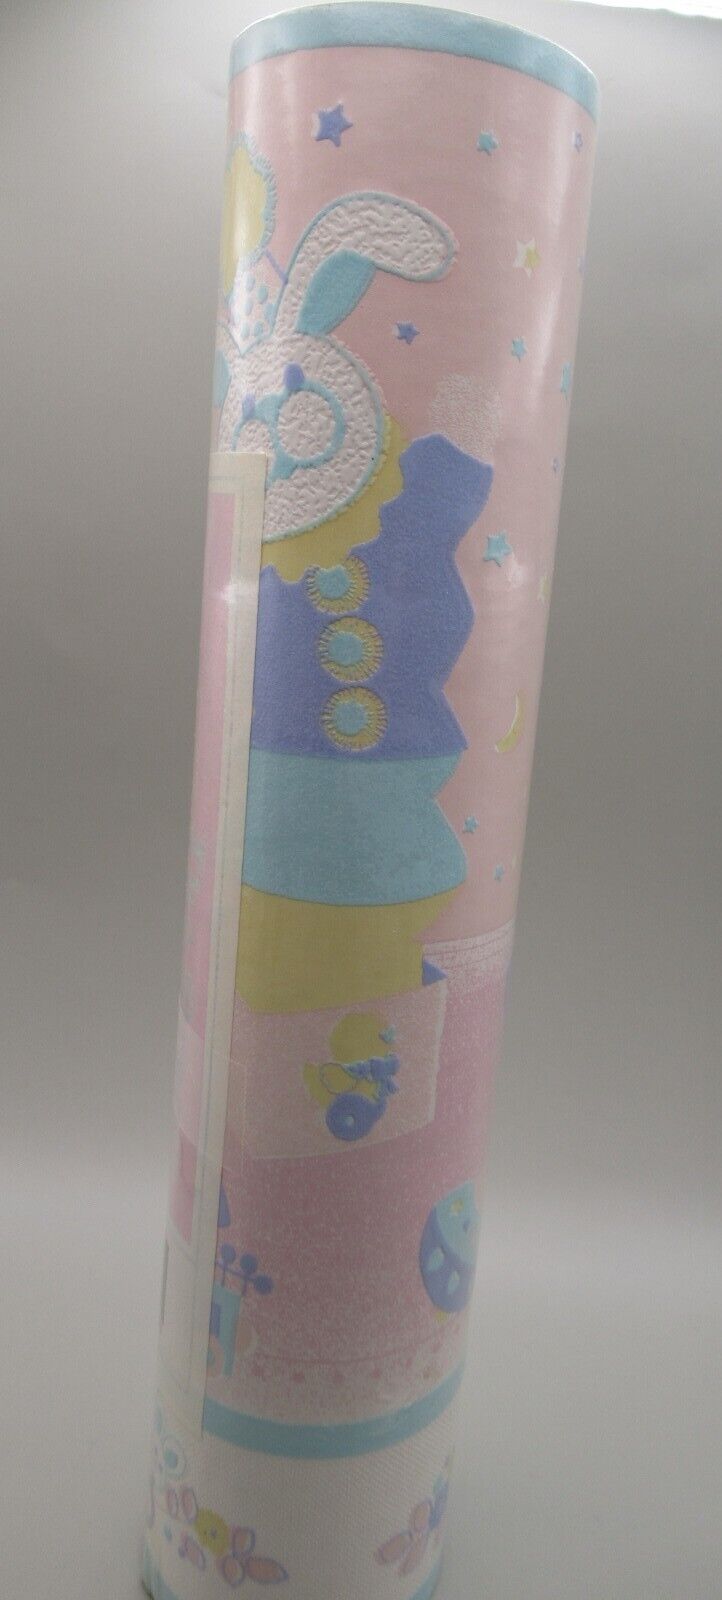 Baby Wallpaper Border Nursery Girl Bedroom Décor 10 In Wide Pink And Blue New